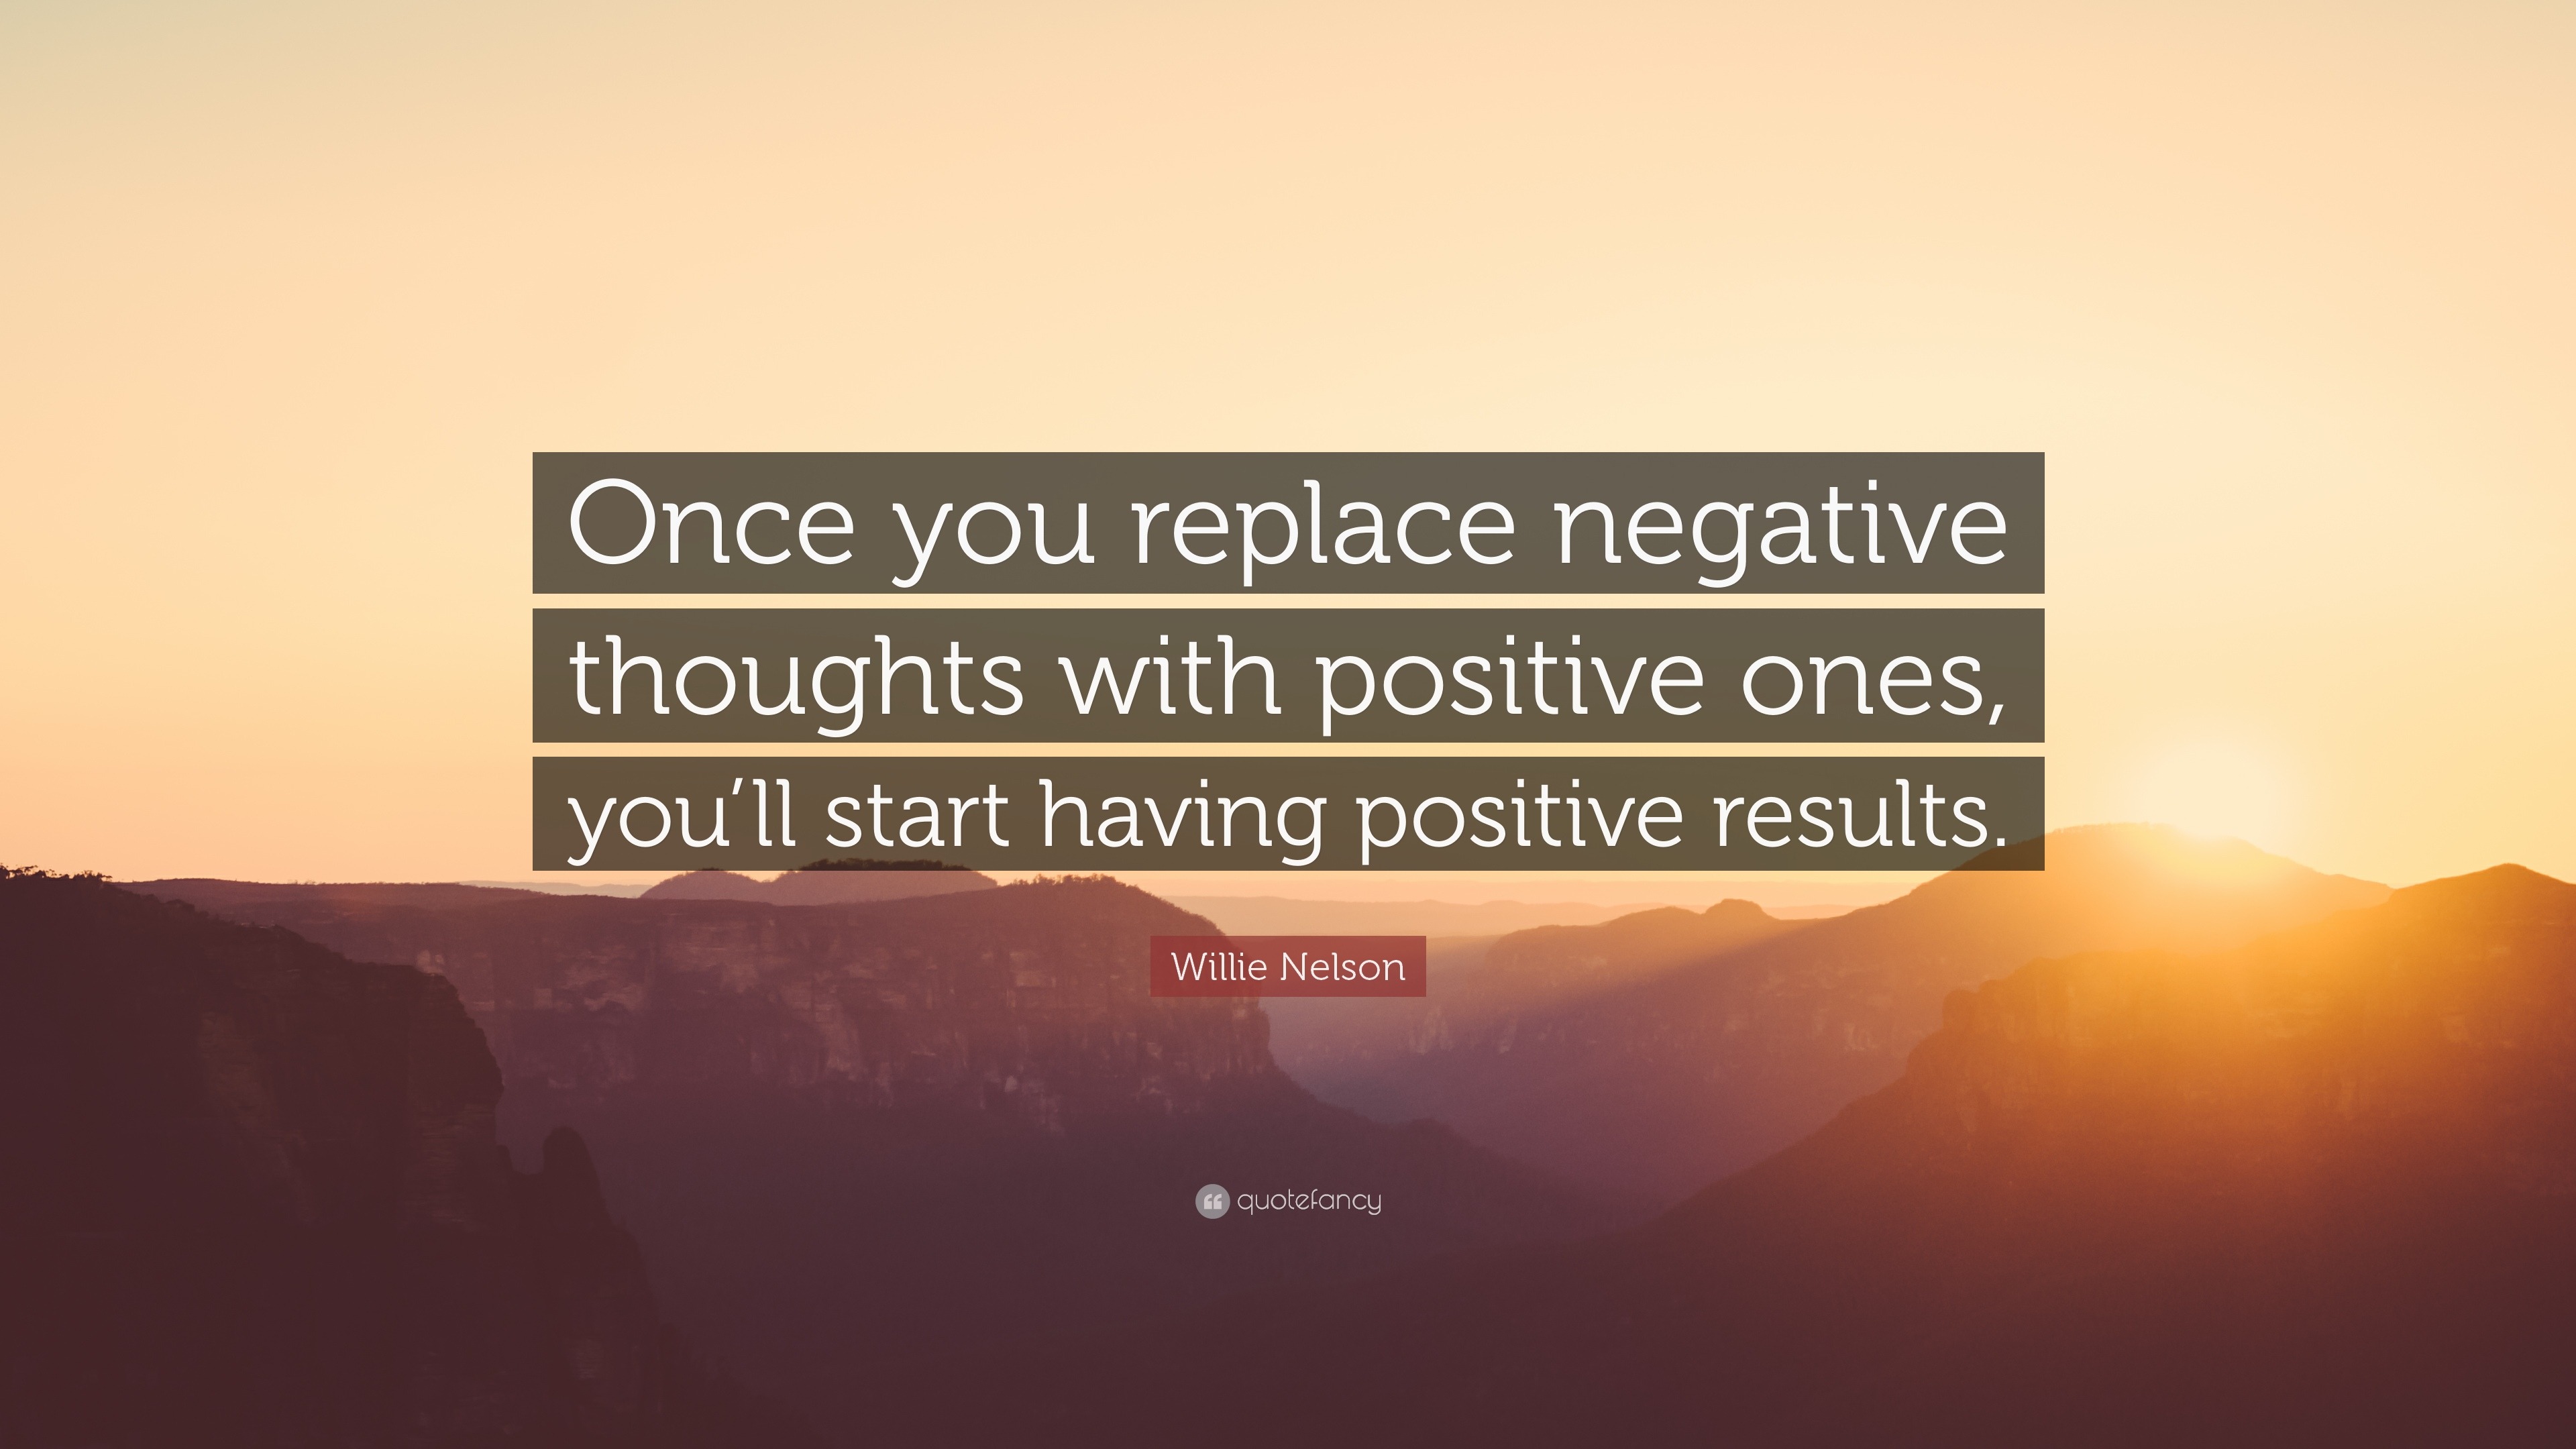 30734 Willie Nelson Quote Once you replace negative thoughts with